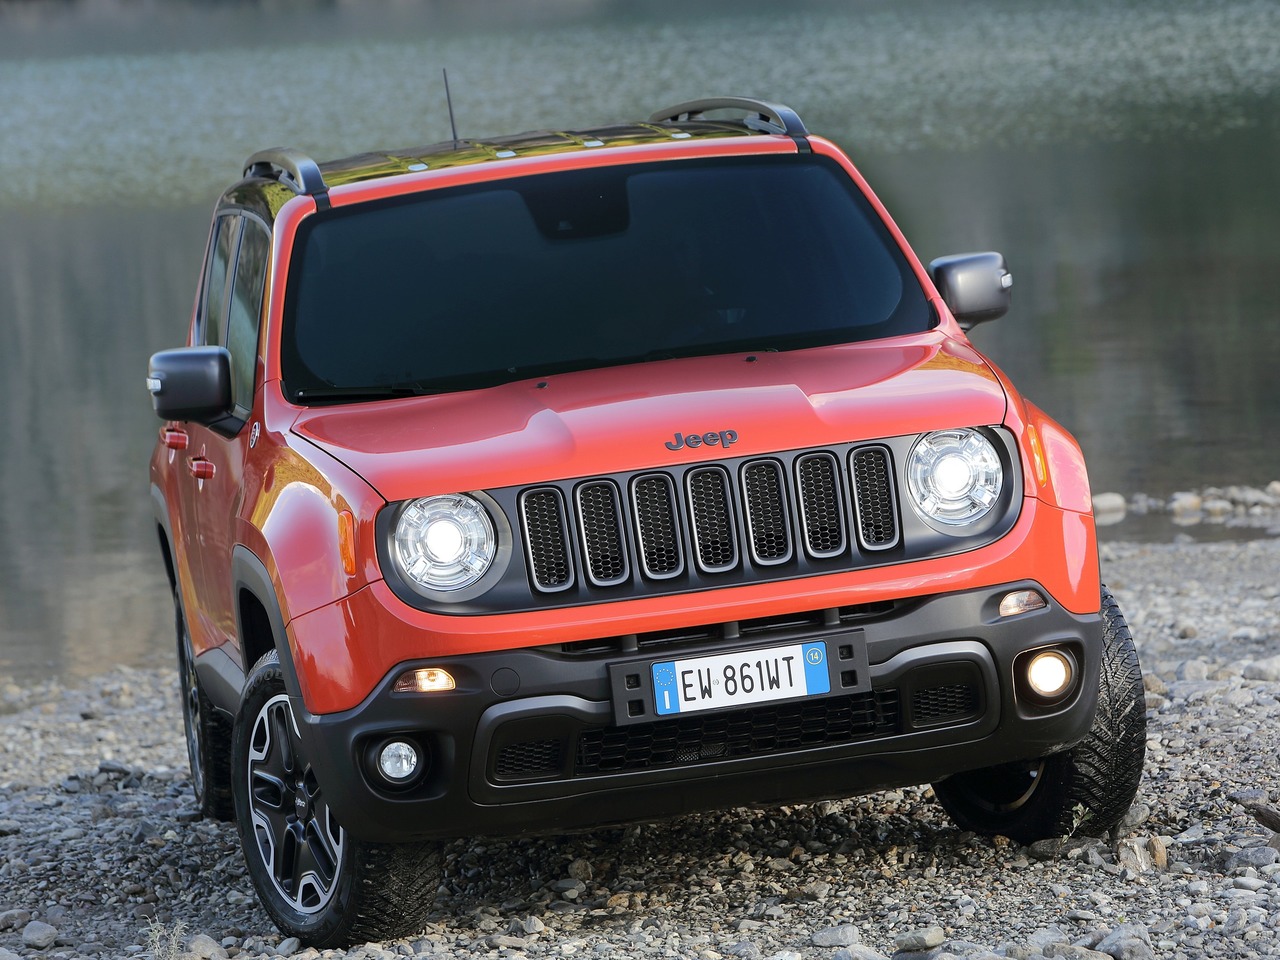 Jeep Renegade 1.4 MultiAir2 (170 Hp) 4x4 Automatic start&stop